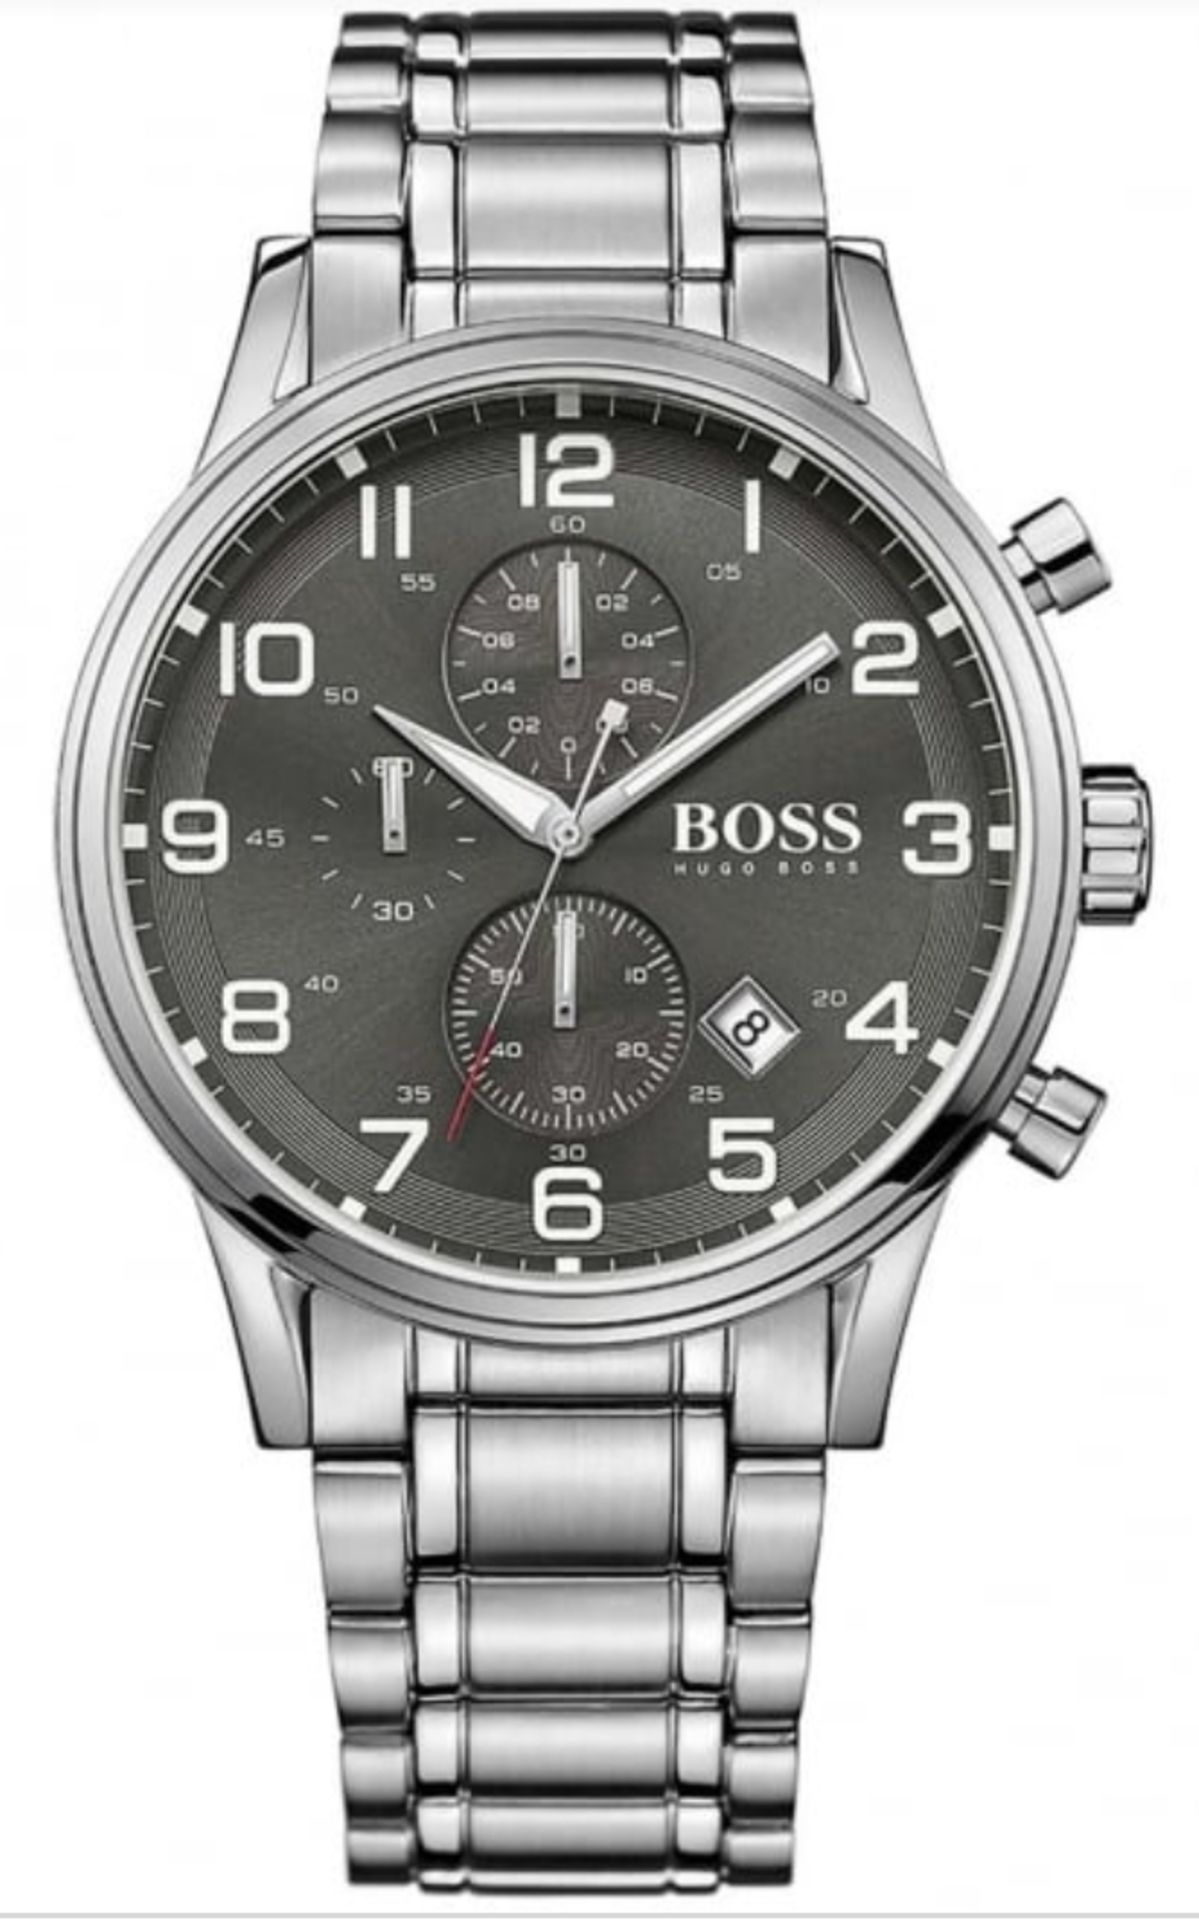 Hugo Boss Trade Lot 1C. A Total Of 20 Brand New Hugo Boss Watches - Image 2 of 20